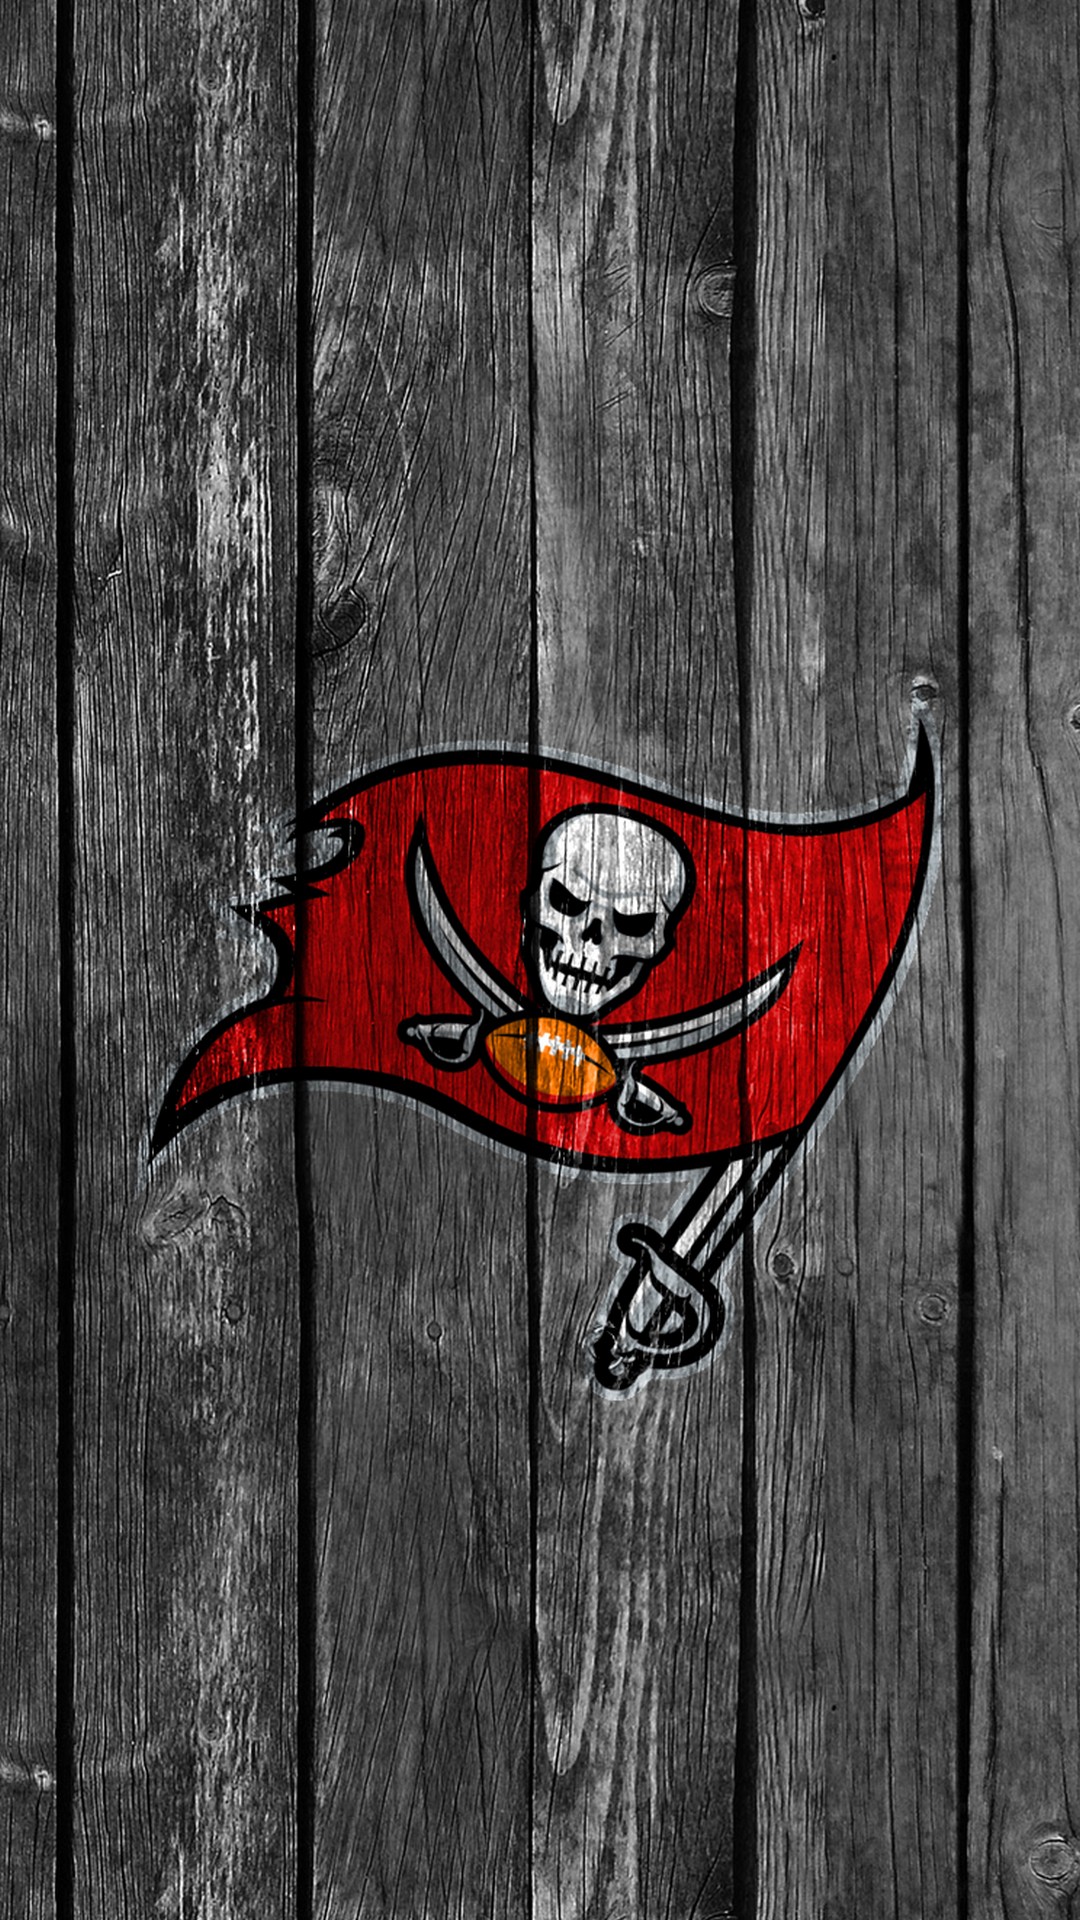 Tampa Bay Buccaneers Logo iPhone Wallpaper High Quality With high-resolution 1080X1920 pixel. Donwload and set as wallpaper for your iPhone X, iPhone XS home screen backgrounds, XS Max, XR, iPhone8 lock screen wallpaper, iPhone 7, 6, SE, and other mobile devices